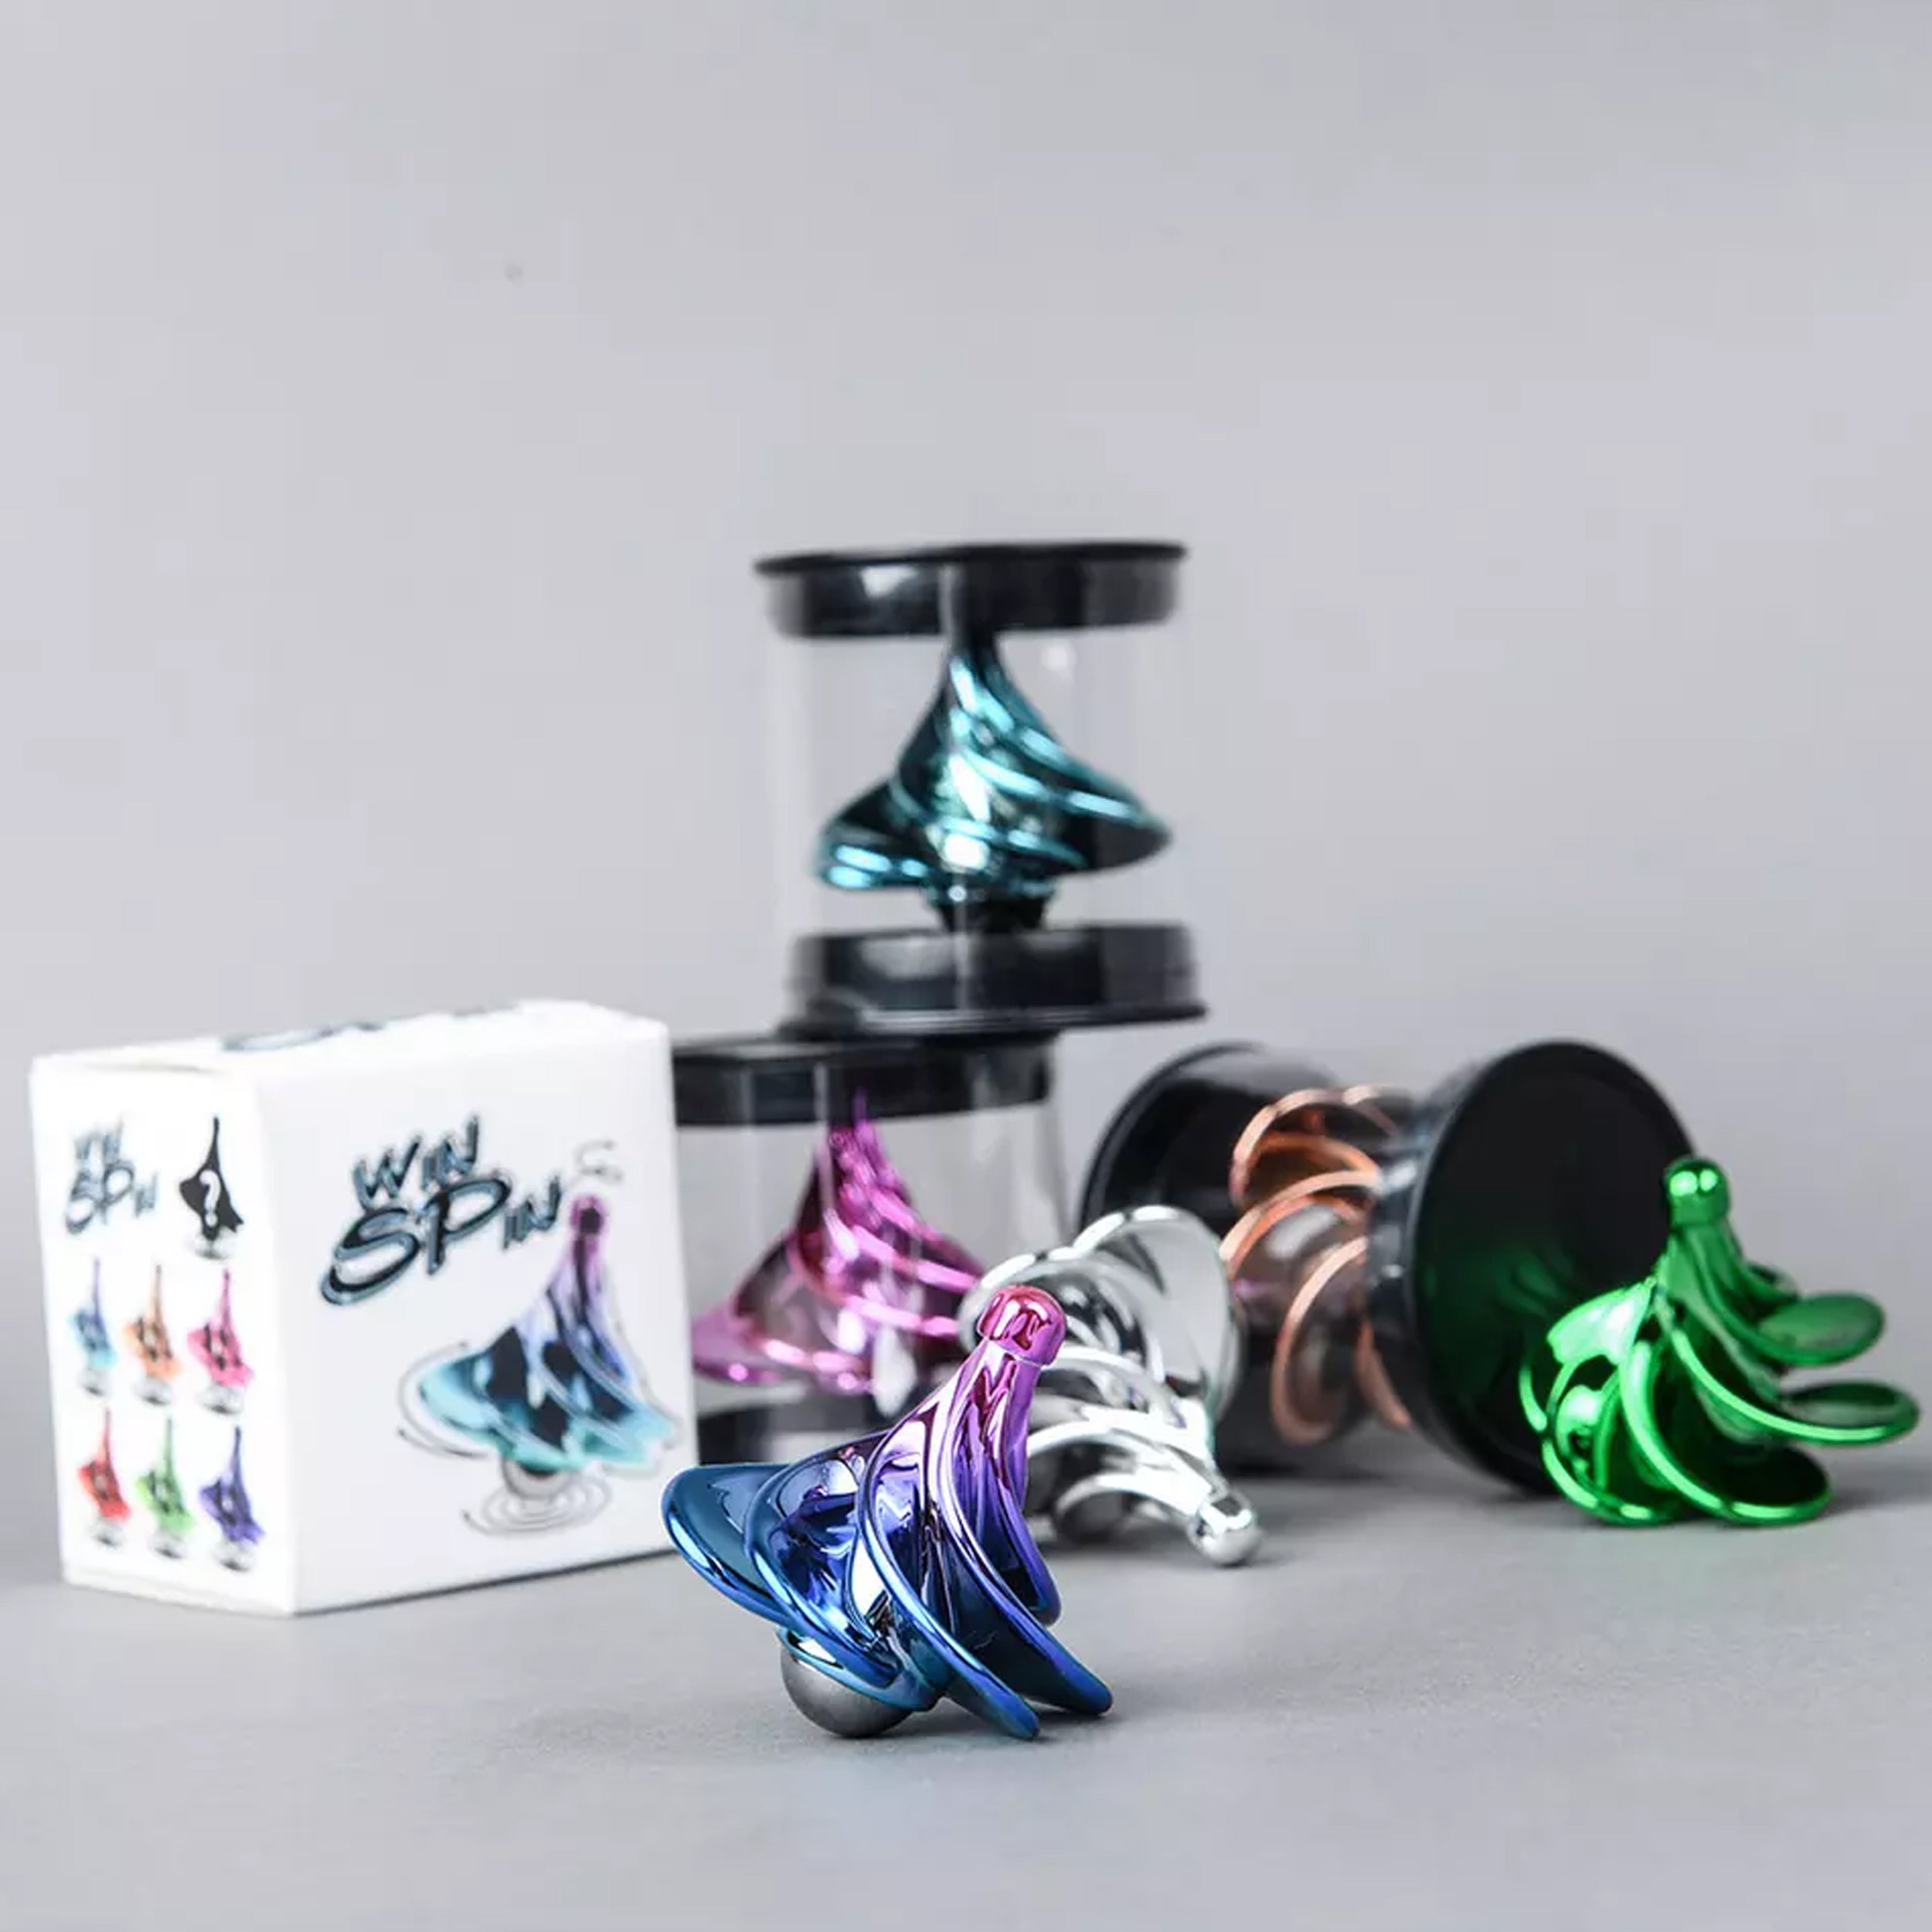 Win Spin Gyro Toys - High-Speed Rotating Fidget Spinner for Stress Relief